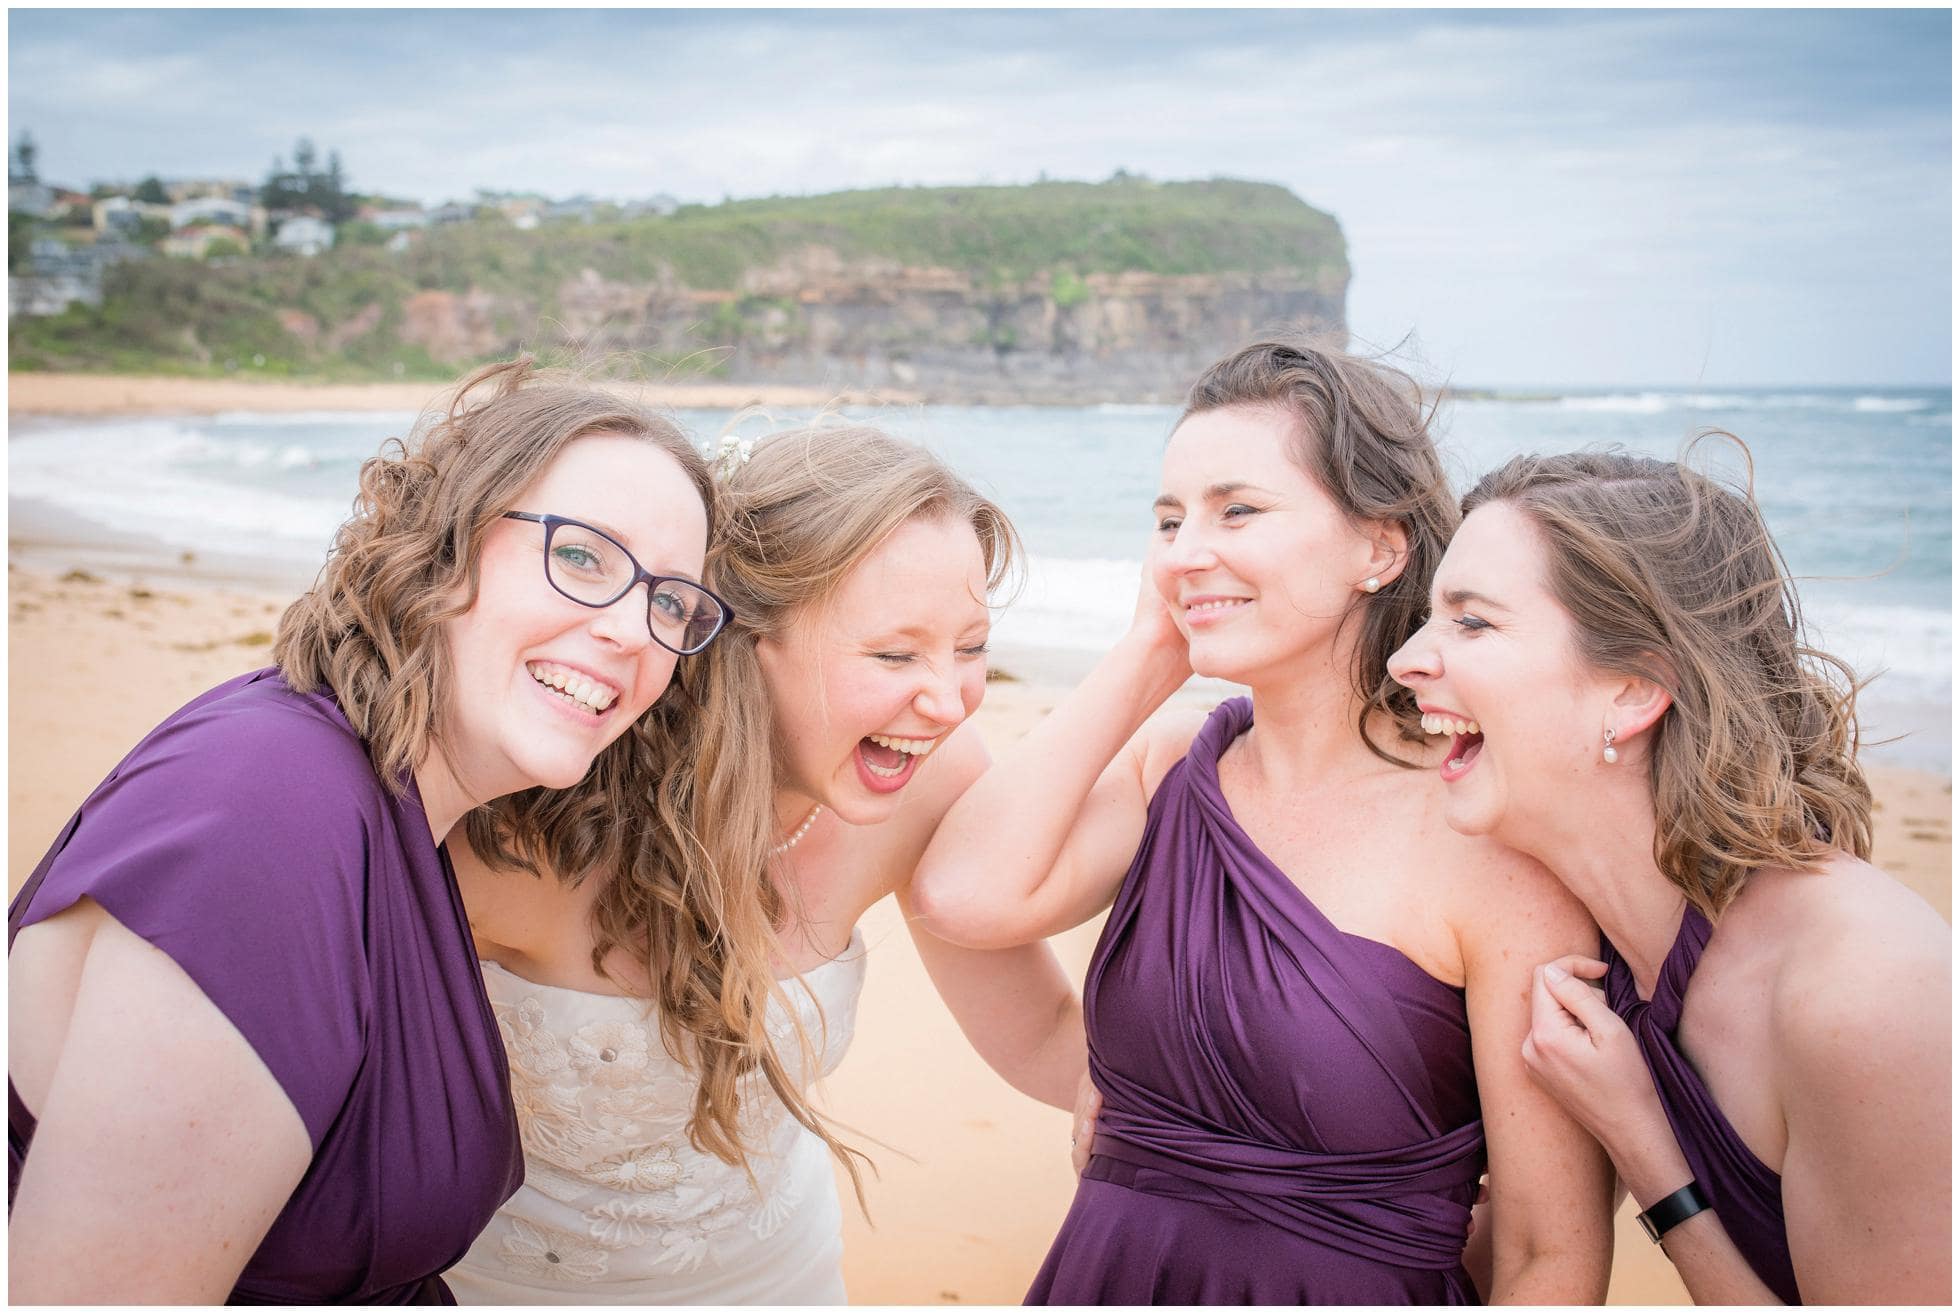 Natural wedding photography - capturing those moments of laughter in Mona Vale, Sydney